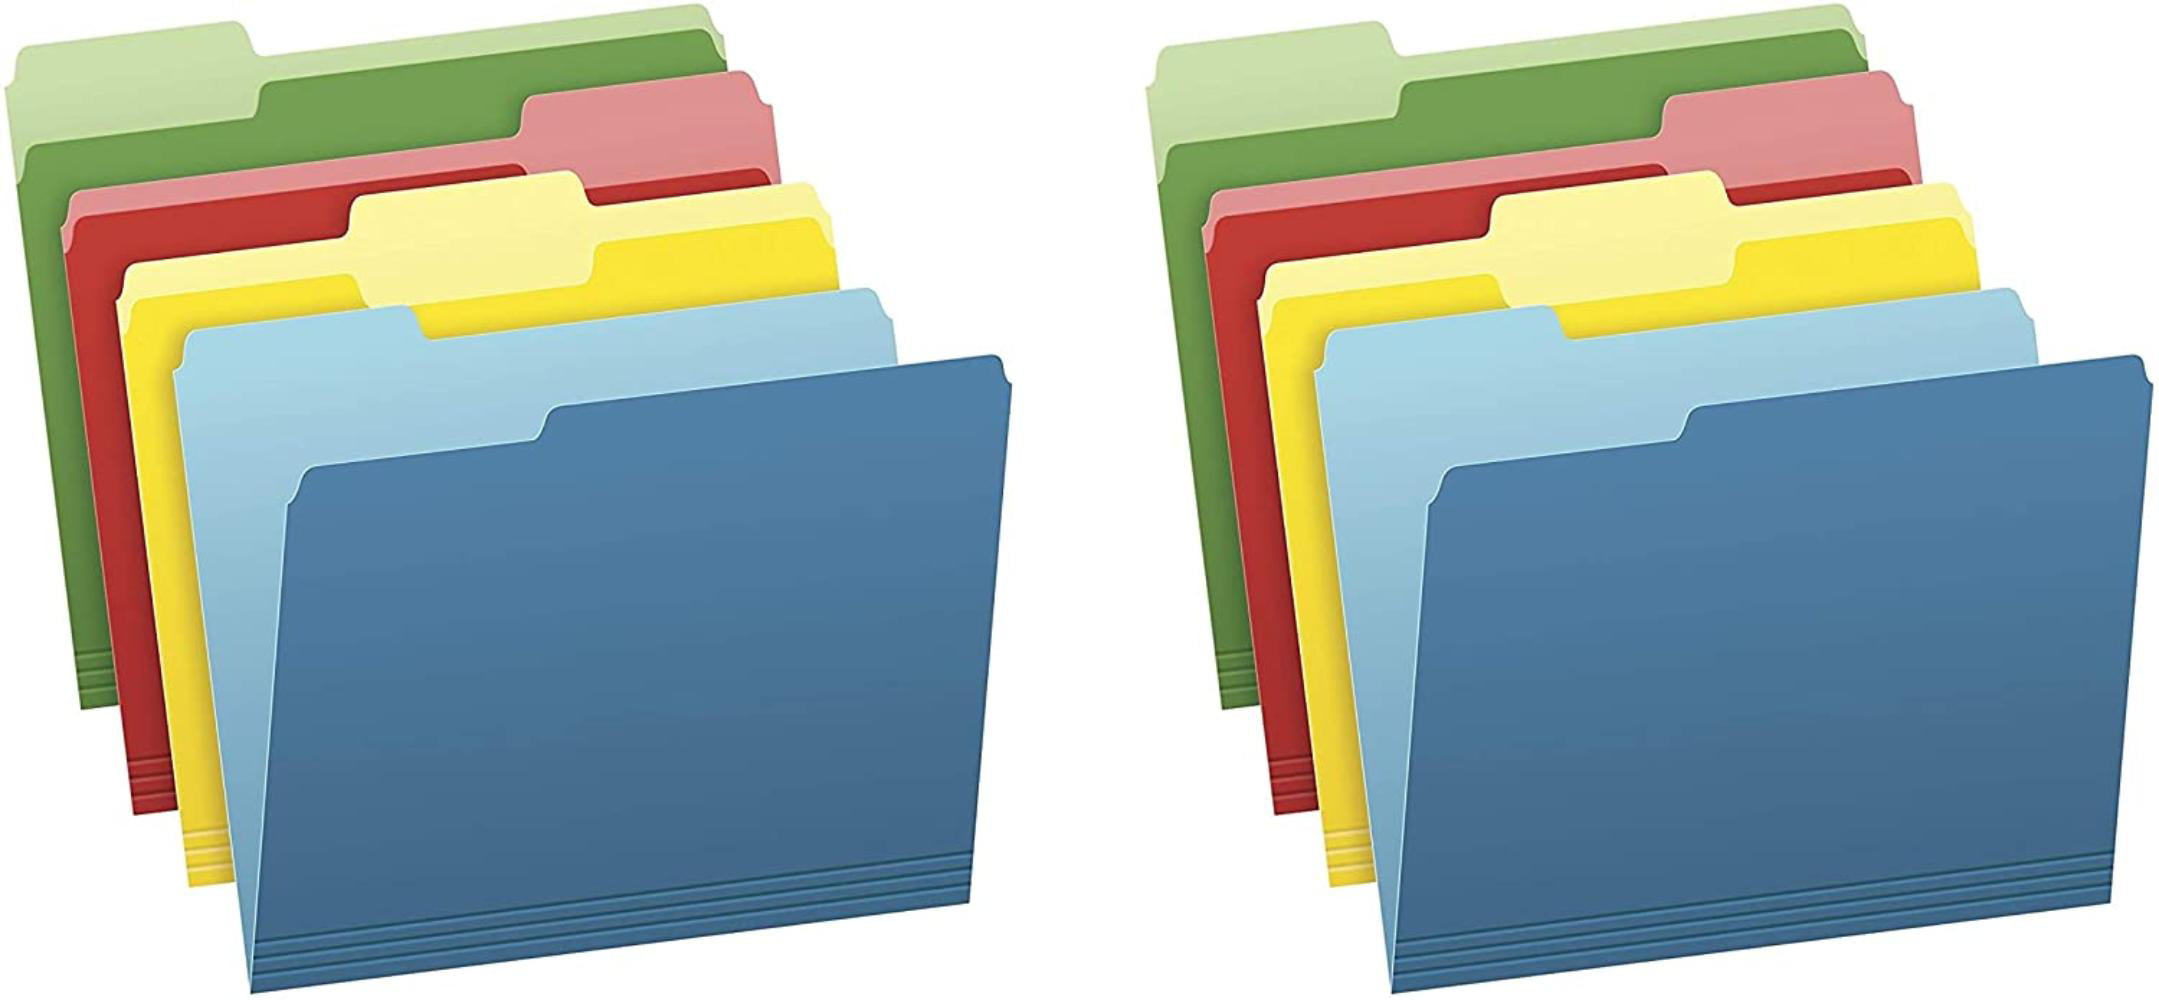 36 Pack 1/3-Cut Tabs Assorted Colors Assorted 03086 Pendaflex Two-Tone Color File Folders Bright Green, Yellow, Red, Blue Letter Size 